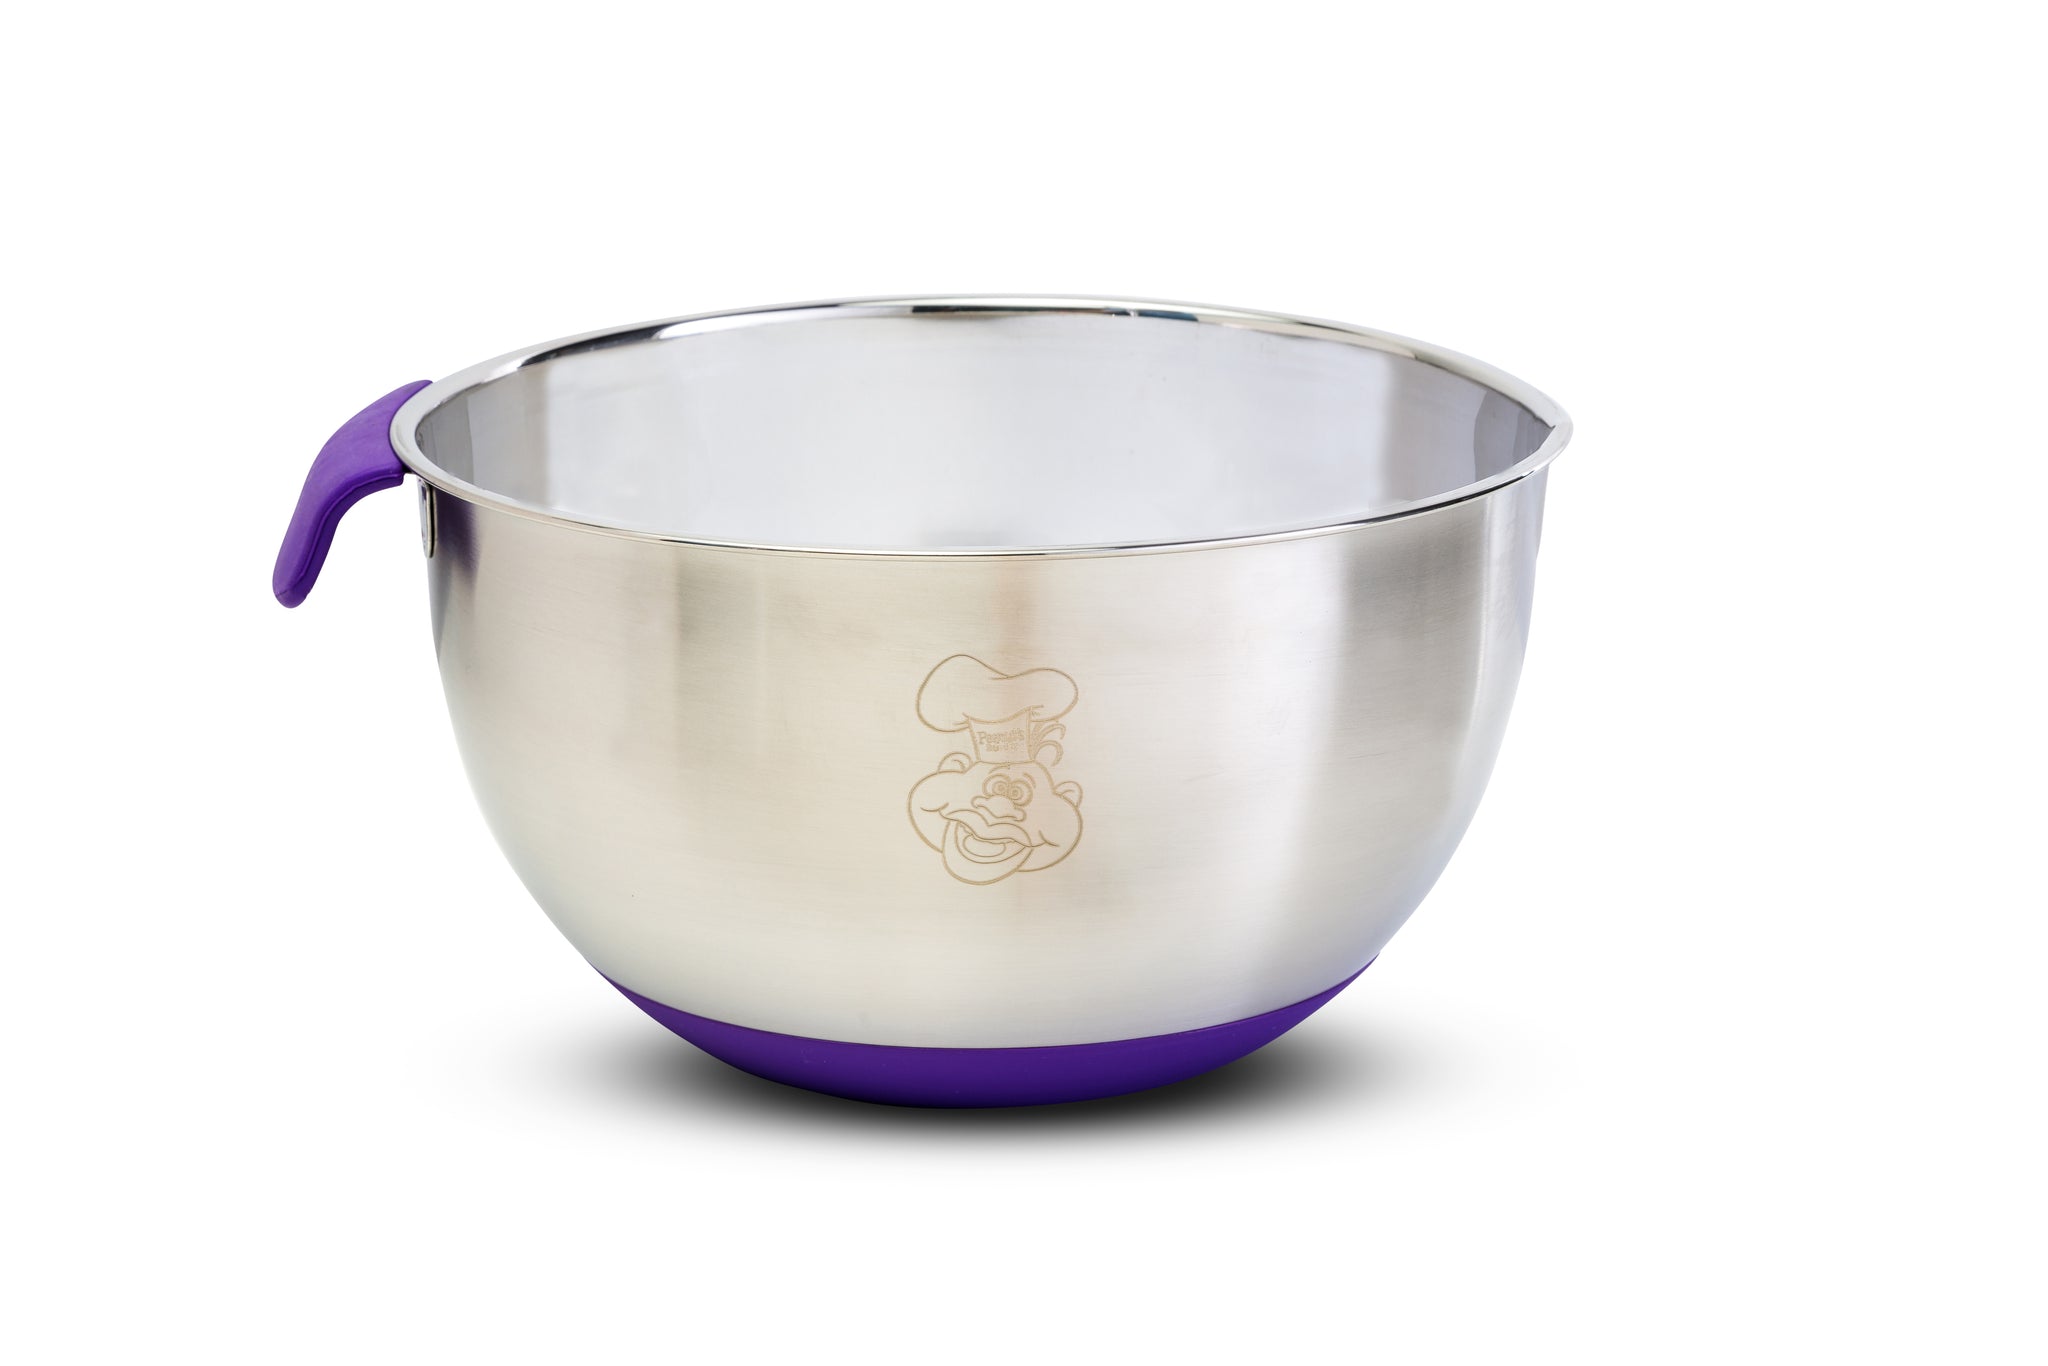 Stainless Steel Mixing Bowl, Stainless Steel Bowl Handle